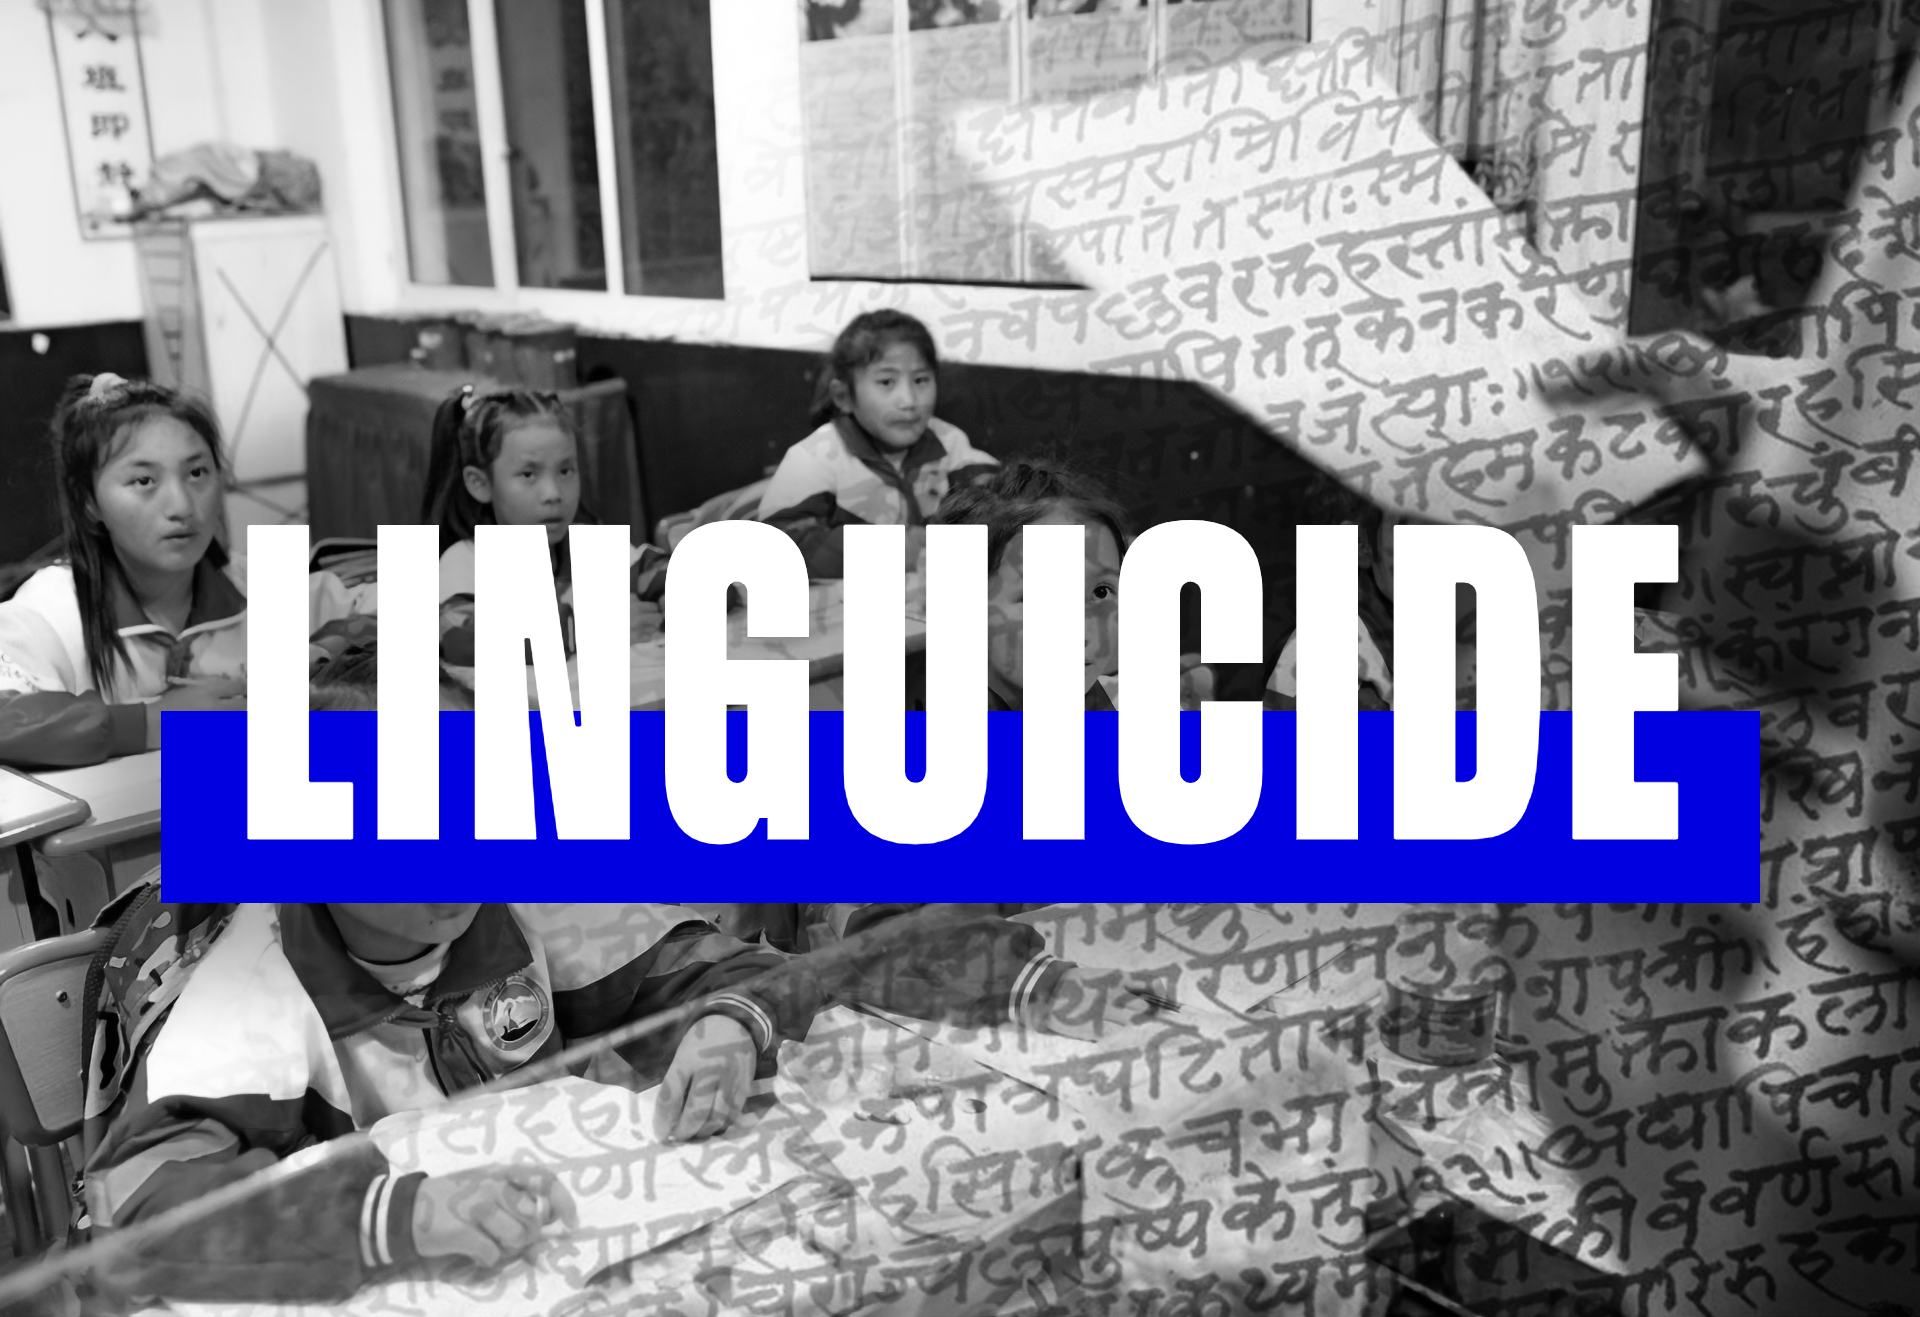 Linguicide (noun): The death of a language, especially from government oppression and cultural genocide.